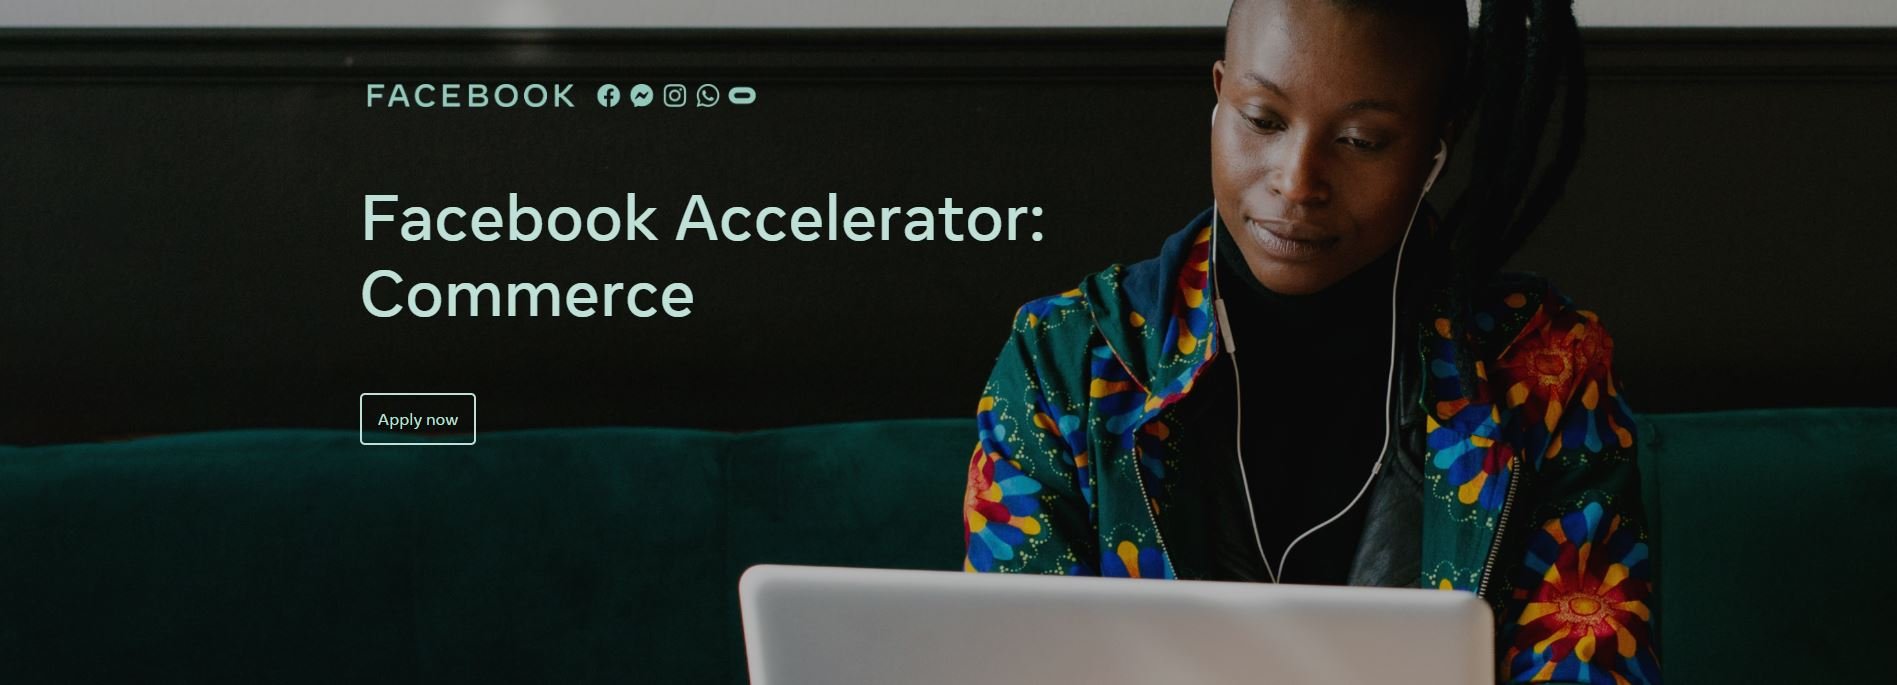 New Facebook accelerator opens to European startups working on ecommerce solutions